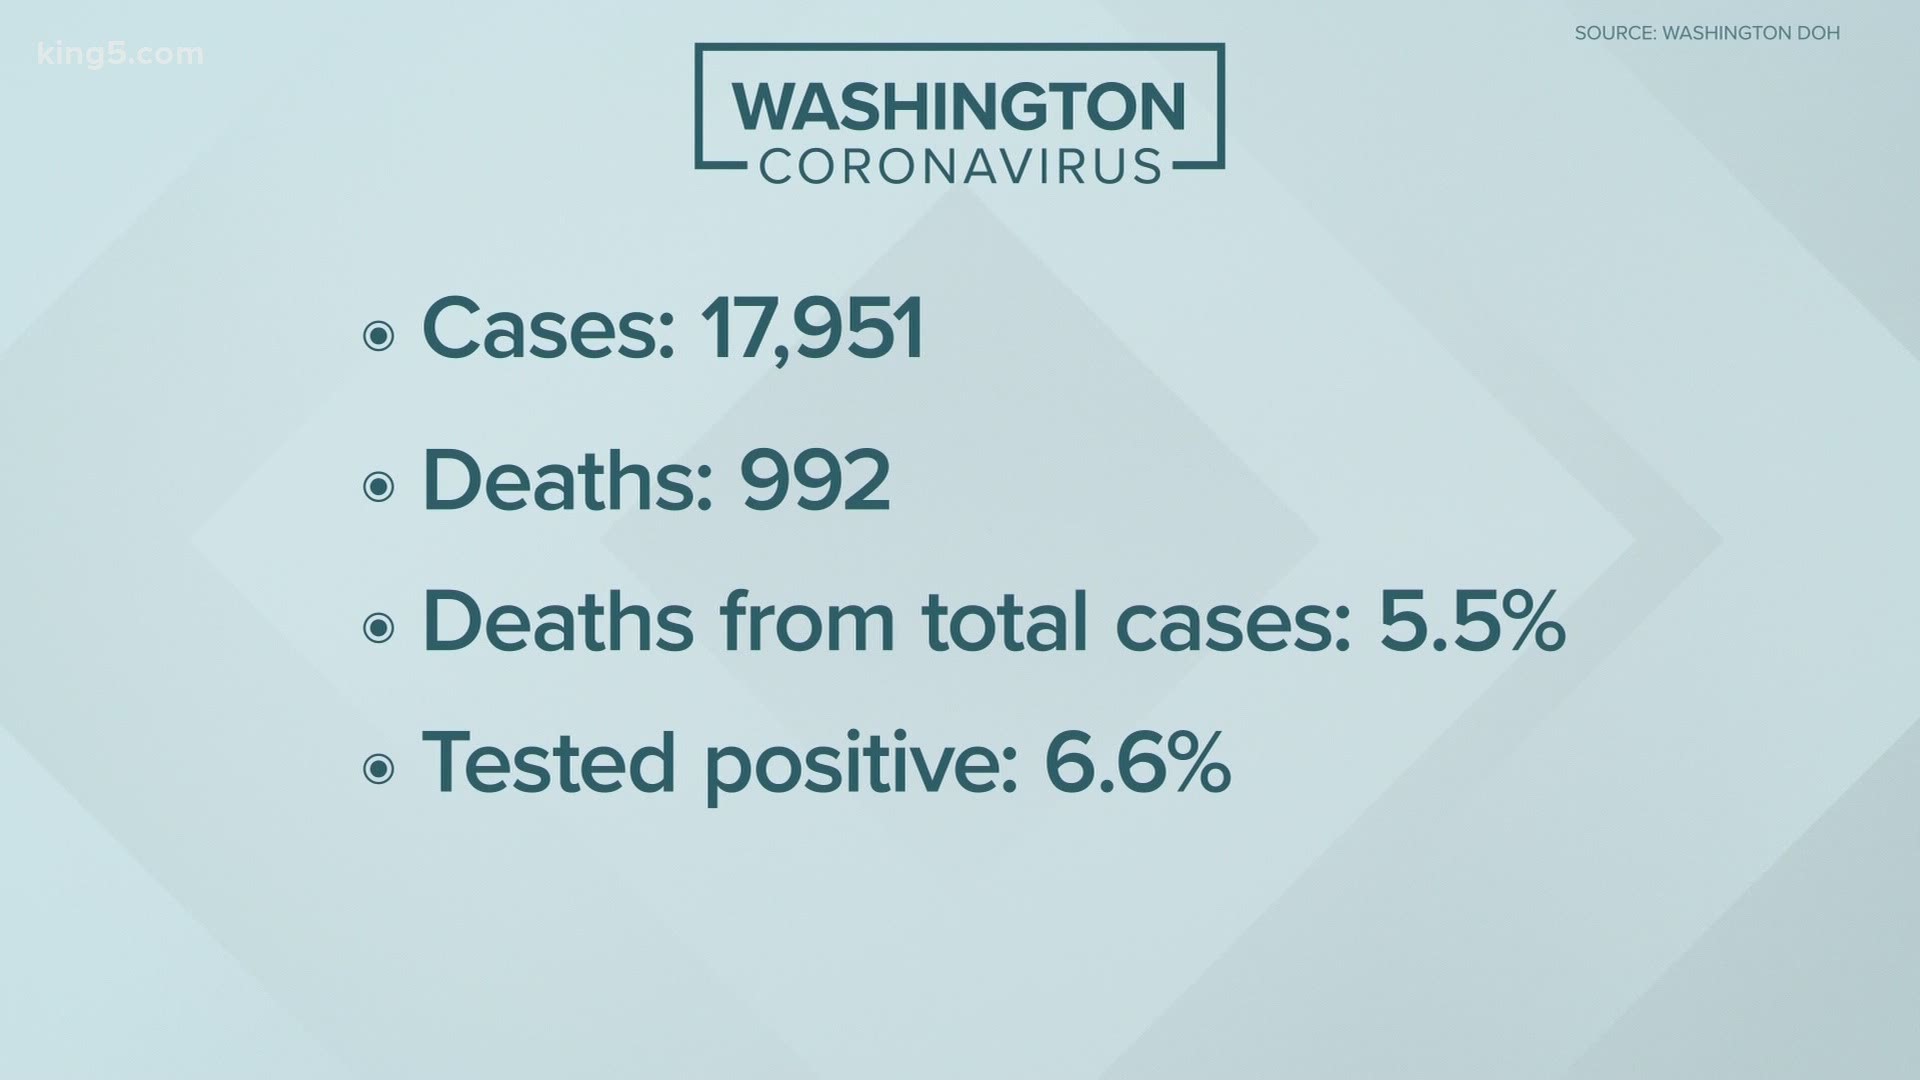 The latest on the coronavirus pandemic in Washington state from KING 5 News on May 15 at 5 p.m. More: www.king5.com/coronavirus